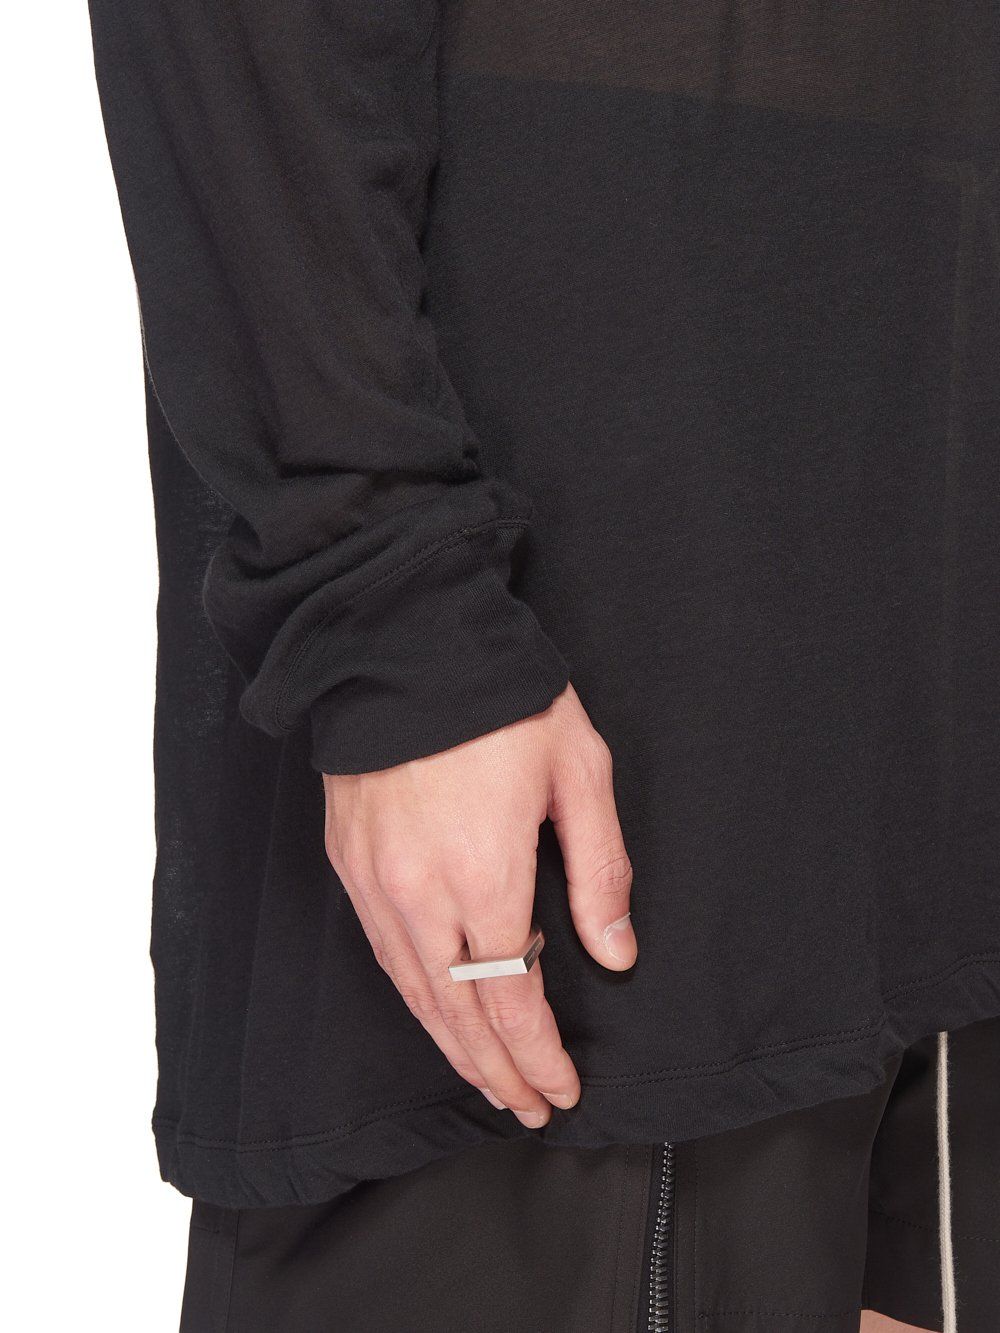 RICK OWENS - 【23SS】D リング / DRING RING / シルバー | STORY